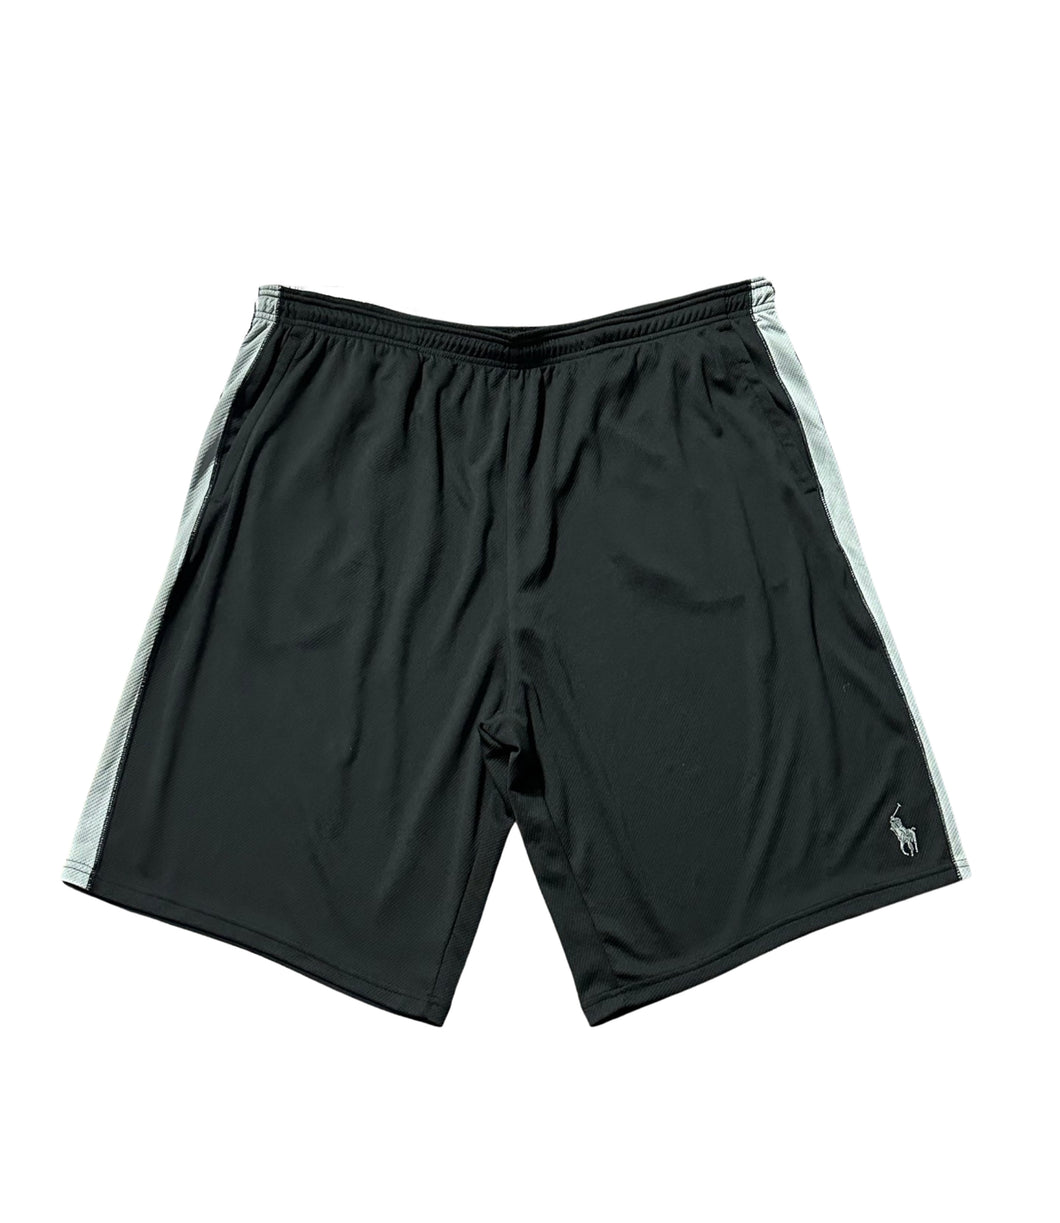 Polo Ralph Lauren Shorts (Big and Tall)